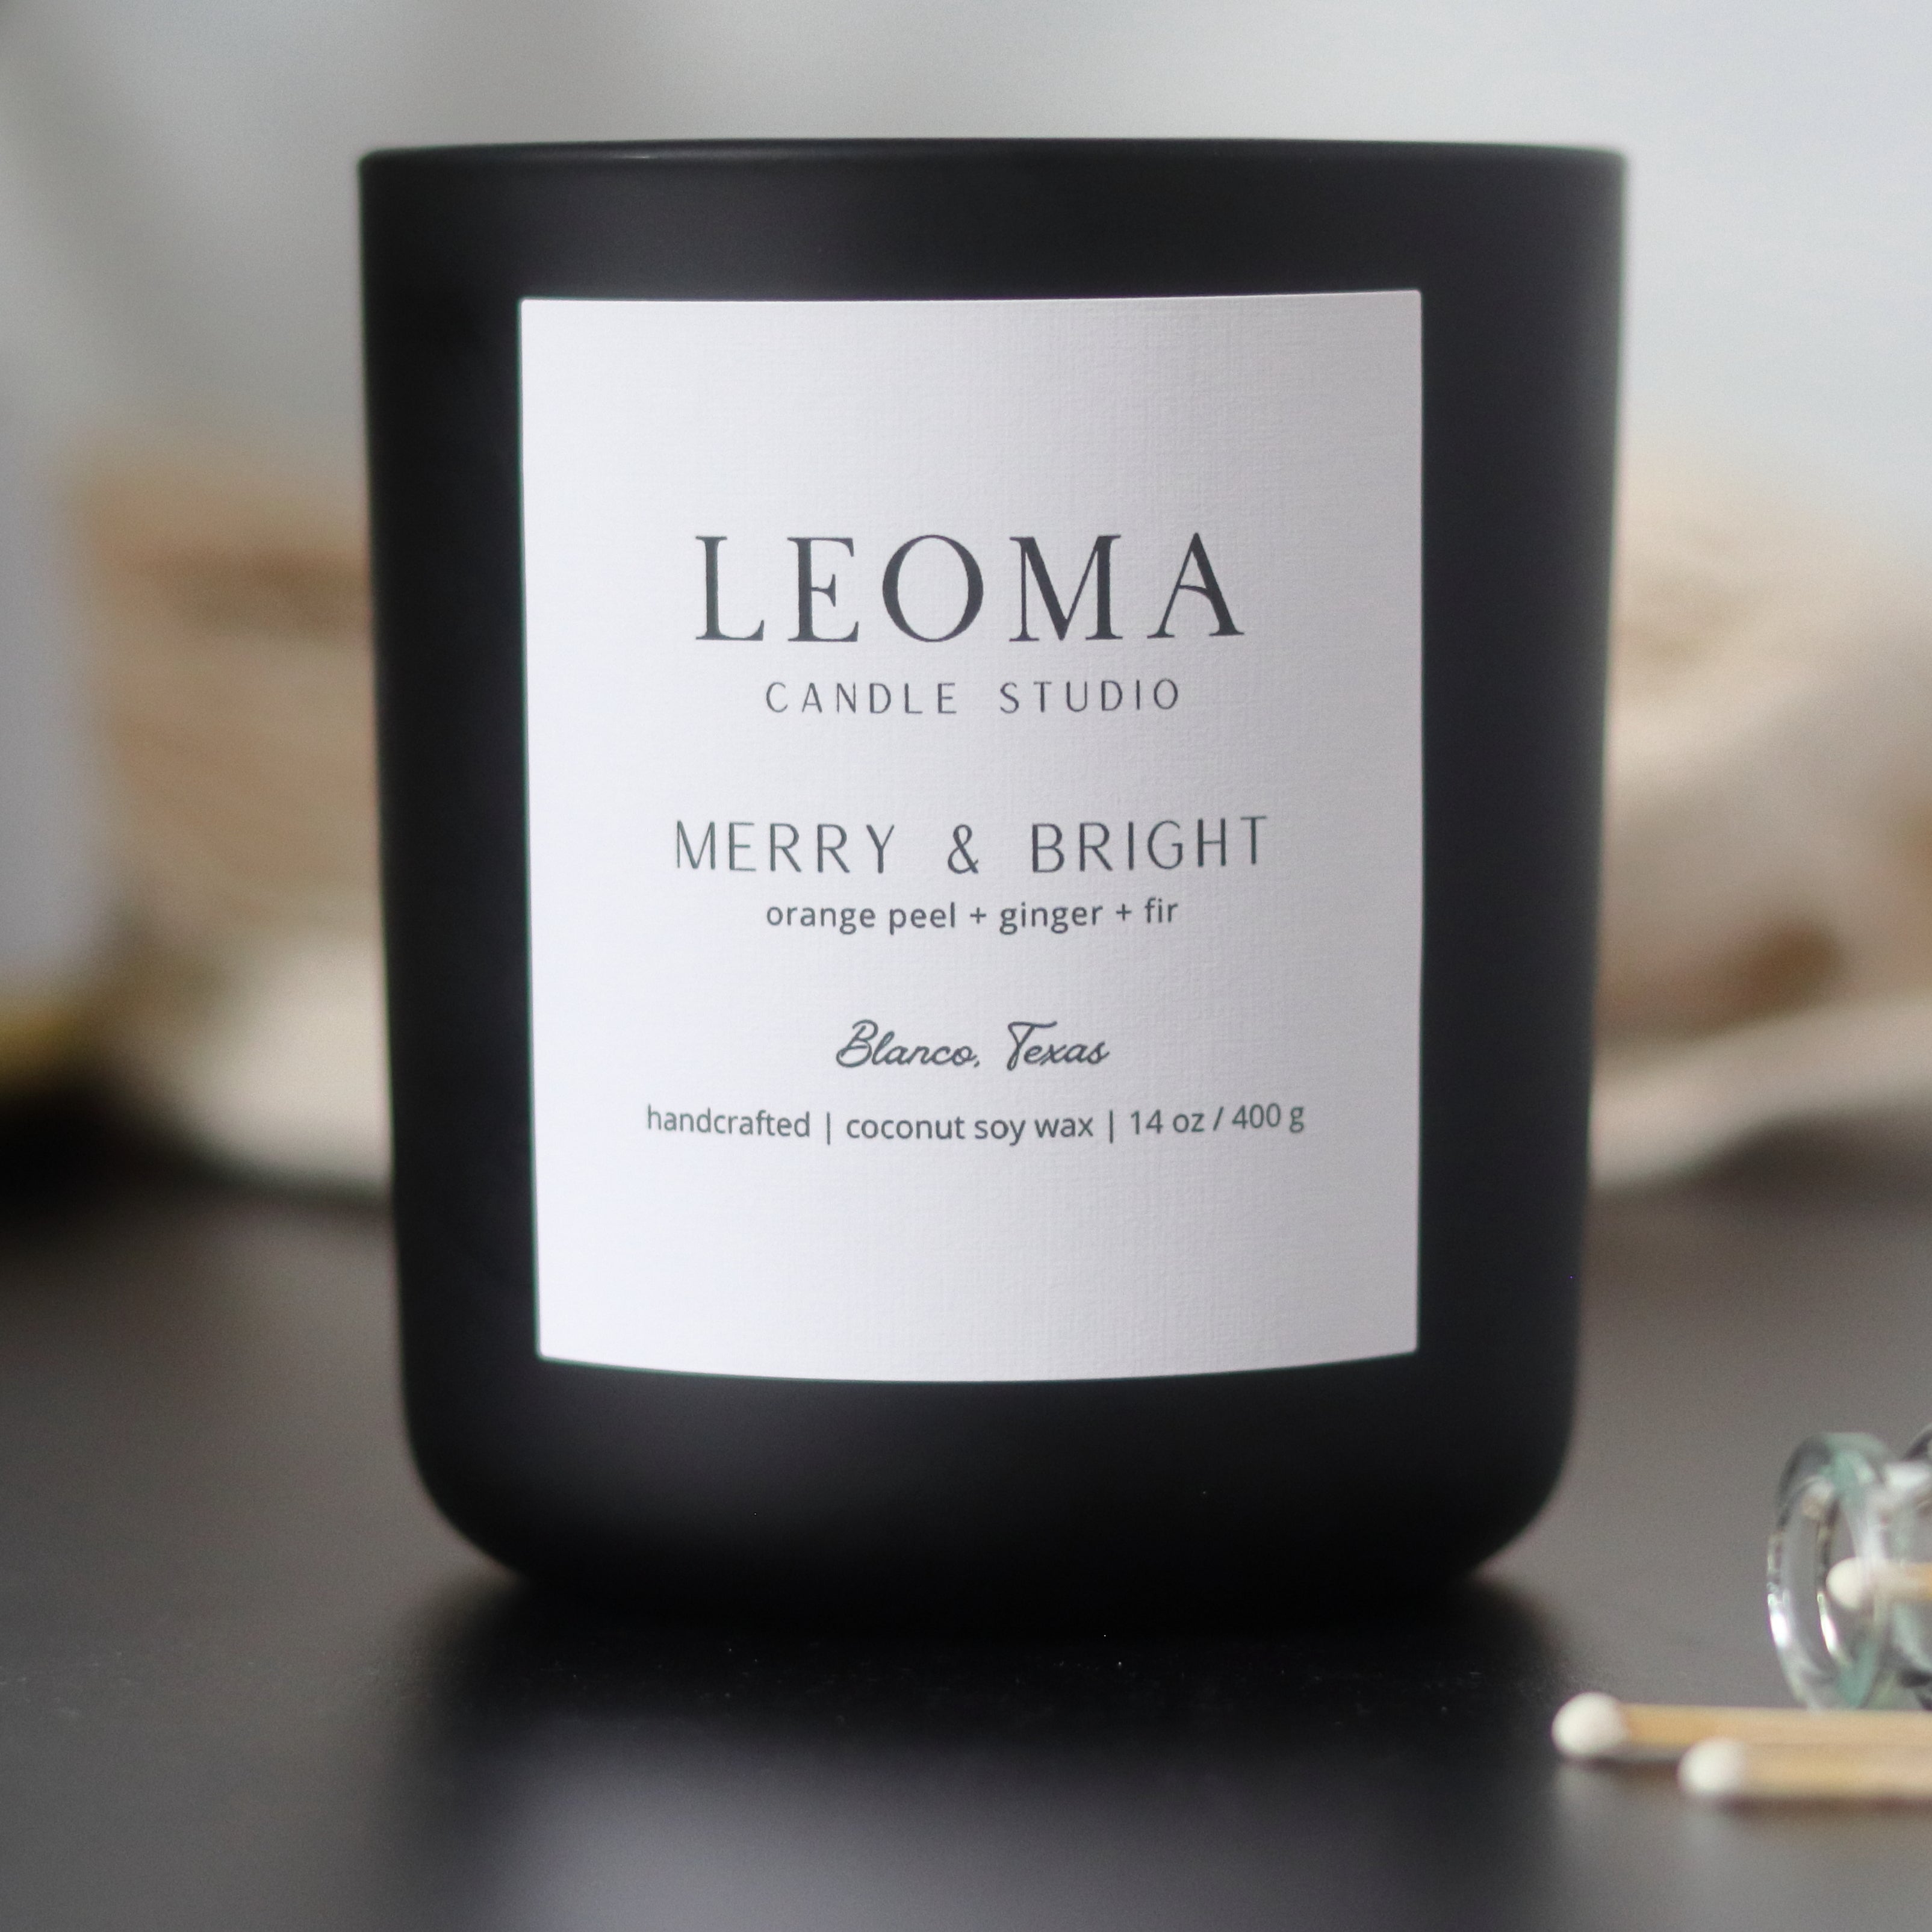 Handcrafted eco-friendly scented candle. Natural coconut & soy wax, toxin-free, 100% cotton wicks. Black vessel. Merry and Bright scented.